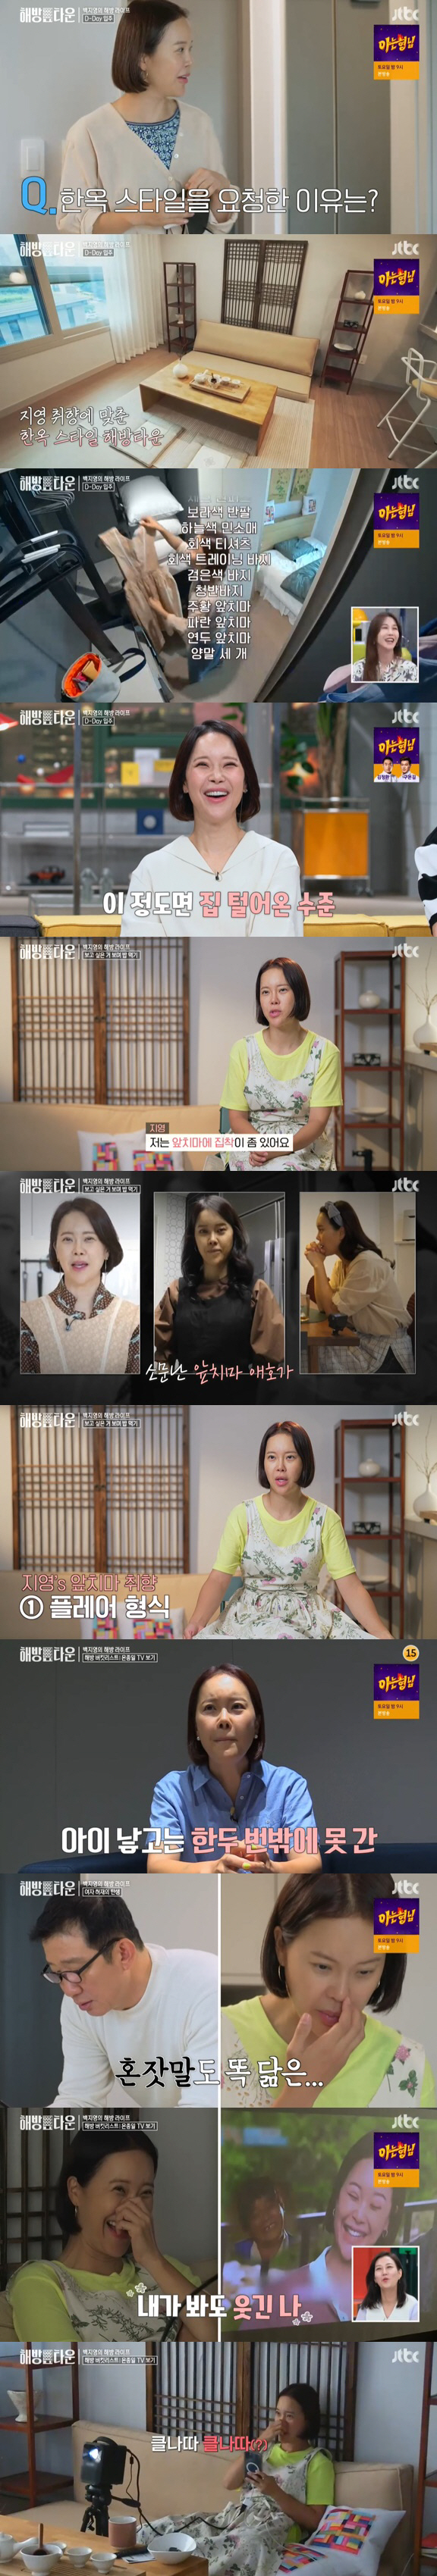 Baek Ji-young enjoyed his first Feminist movement life as a real Baek Ji-young, not Queen of Ballard and HAIM is Mom.On the 10th, JTBC Where I Return to Me - Feminist Movement Town, Baek Ji-young was shown as a resident of 5.On this day, Baek Ji-young asked about his feelings of moving in, saying, I felt Feminist movement with the breath of freedom. I was very satisfied with the smile without knowing it.MC Boom said, I am worried that Baek Ji-young is a representative love worker and daughter fool in the entertainment industry.I have been sleeping outside the night and coming home again, but if HAIM is good, I will give you a gift that I like, said Baek Ji-young.Then he said, Go well on the day he went, and laughed.Boom also asked, Is it that you have the nickname Woman Hur Jae? So Baek Ji-young said, No.I am a housewife who does a lot of work at home, but why do you compare it with Mr. Hur Jae? He soon said, I am clumsy on the machine side. It happens at the time when HAIM happens, and it happens at 8 oclock at the latest, and food is also eaten mainly by HAIMs favorite food, said Baek Ji-young, a fifth-year working mom.Everything in life is HAIM, Confessions said, her daughter fool.Baek Ji-young said that sending Haru without purpose in the feminist movement town seems to be healing.When I wake up at home, I always have a purpose to send my daughter to kindergarten or work, he said. I had a schedule once before, but my father took HAIM somewhere and had time alone.But I could not be comfortable. I prepared food and removed the messy toys. I thought I wanted to be free alone. Baek Ji-young greeted her daughter HAIM at home ahead of moving into Feminist movement town.Baek Ji-young grabbed HAIM in his arms and said, Mom goes out today, sleeps overnight, comes tomorrow, can you be okay? I love you.I felt like I could spend a good free time for myself and enjoy it better for my daughter, said Baek Ji-young.Since then, Baek Ji-young has finally moved into Feminist movement town.The Feminist movement town of Baek Ji-young attracted attention because it was decorated with the concept of hanok.The space for the Baek Ji-young was completed, even with items that made use of Hanok Feelings in a quiet living room.Baek Ji-young brought three large Carriers to the limelight.Then, Baek Ji-young was thrilled with the appearance of Feminist movement town, which was only seen in the video.In Carrier, all kinds of things such as food ingredients, cleansing tools, bedding, etc. were constantly surprised.Jang Yoon-jung, who saw this in the studio, was surprised to say, Have you brought all the housework? What are the people at home?Baek Ji-young, who has also taken three aprons in the Feminist movement town, Confessions said he is obsessed with aprons.I just got married and got an apron, but it was so comfortable, and I didnt care who came or whether I wore underwear, said Baek Ji-young, expressing his affection for the apron.Baek Ji-young then went on a courier unboxing.The first courier service was a beam projector, and Baek Ji-young, who can not see TV properly because of the parenting, was the first thing to order to enjoy home cinema in commemoration of Feminist movement.I love movies so much, said Baek Ji-young, a film enthusiast. I often went to theaters with my husband, but I did not go much after HAIM.I want to see only movies all day Haru Baek Ji-young started installing the beam projector immediately, but she was in despair from the beginning as she was famous for her usual mechanics.He also struggled with the manual for a while and laughed like Hur Jae and Doppelganger, writing Internet search chances.Hur Jae, who watched this, said, I did not just write it up, it is similar to me. Baek Ji-young admitted that he resembled me.Woman Hur Jae Baek Ji-young succeeded in installing a beam projector at the end of twists and turns, and enjoyed watching the entertainment that he had connected with his cell phone.At this time, Baek Ji-young was very happy when actor Kim Sun-ho embraced him, and Baek Ji-young, who saw himself like that, was ashamed and laughed, saying, My husband will be a big deal.Baek Ji-young, who enjoyed a beam projector, immediately went into dinner preparations; the meal Baek Ji-young chose was the favorite menu Maratang.However, big hand Baek Ji-young could not measure the amount of one person and boldly threw the five-person sauce and soon began coughing on the extreme spicy taste.Tears, runny noses, and Baek Ji-young rushed out of Mara oil and started a Maratang CPR.Baek Ji-young said of the first Feminist movement Haru, I actually feel sorry for the child.However, Feelings, who seemed to have discovered oasis in the desert, moved into Feminist movement town. I watched a lot of fun dramas and drank tea comfortably. I liked the time I enjoyed alone.I want to spend more meaningful time in the future with various experiences in Feminist movement town. Meanwhile, Baek Ji-young married actor Jung Suk-won in 2013, and has a daughter.